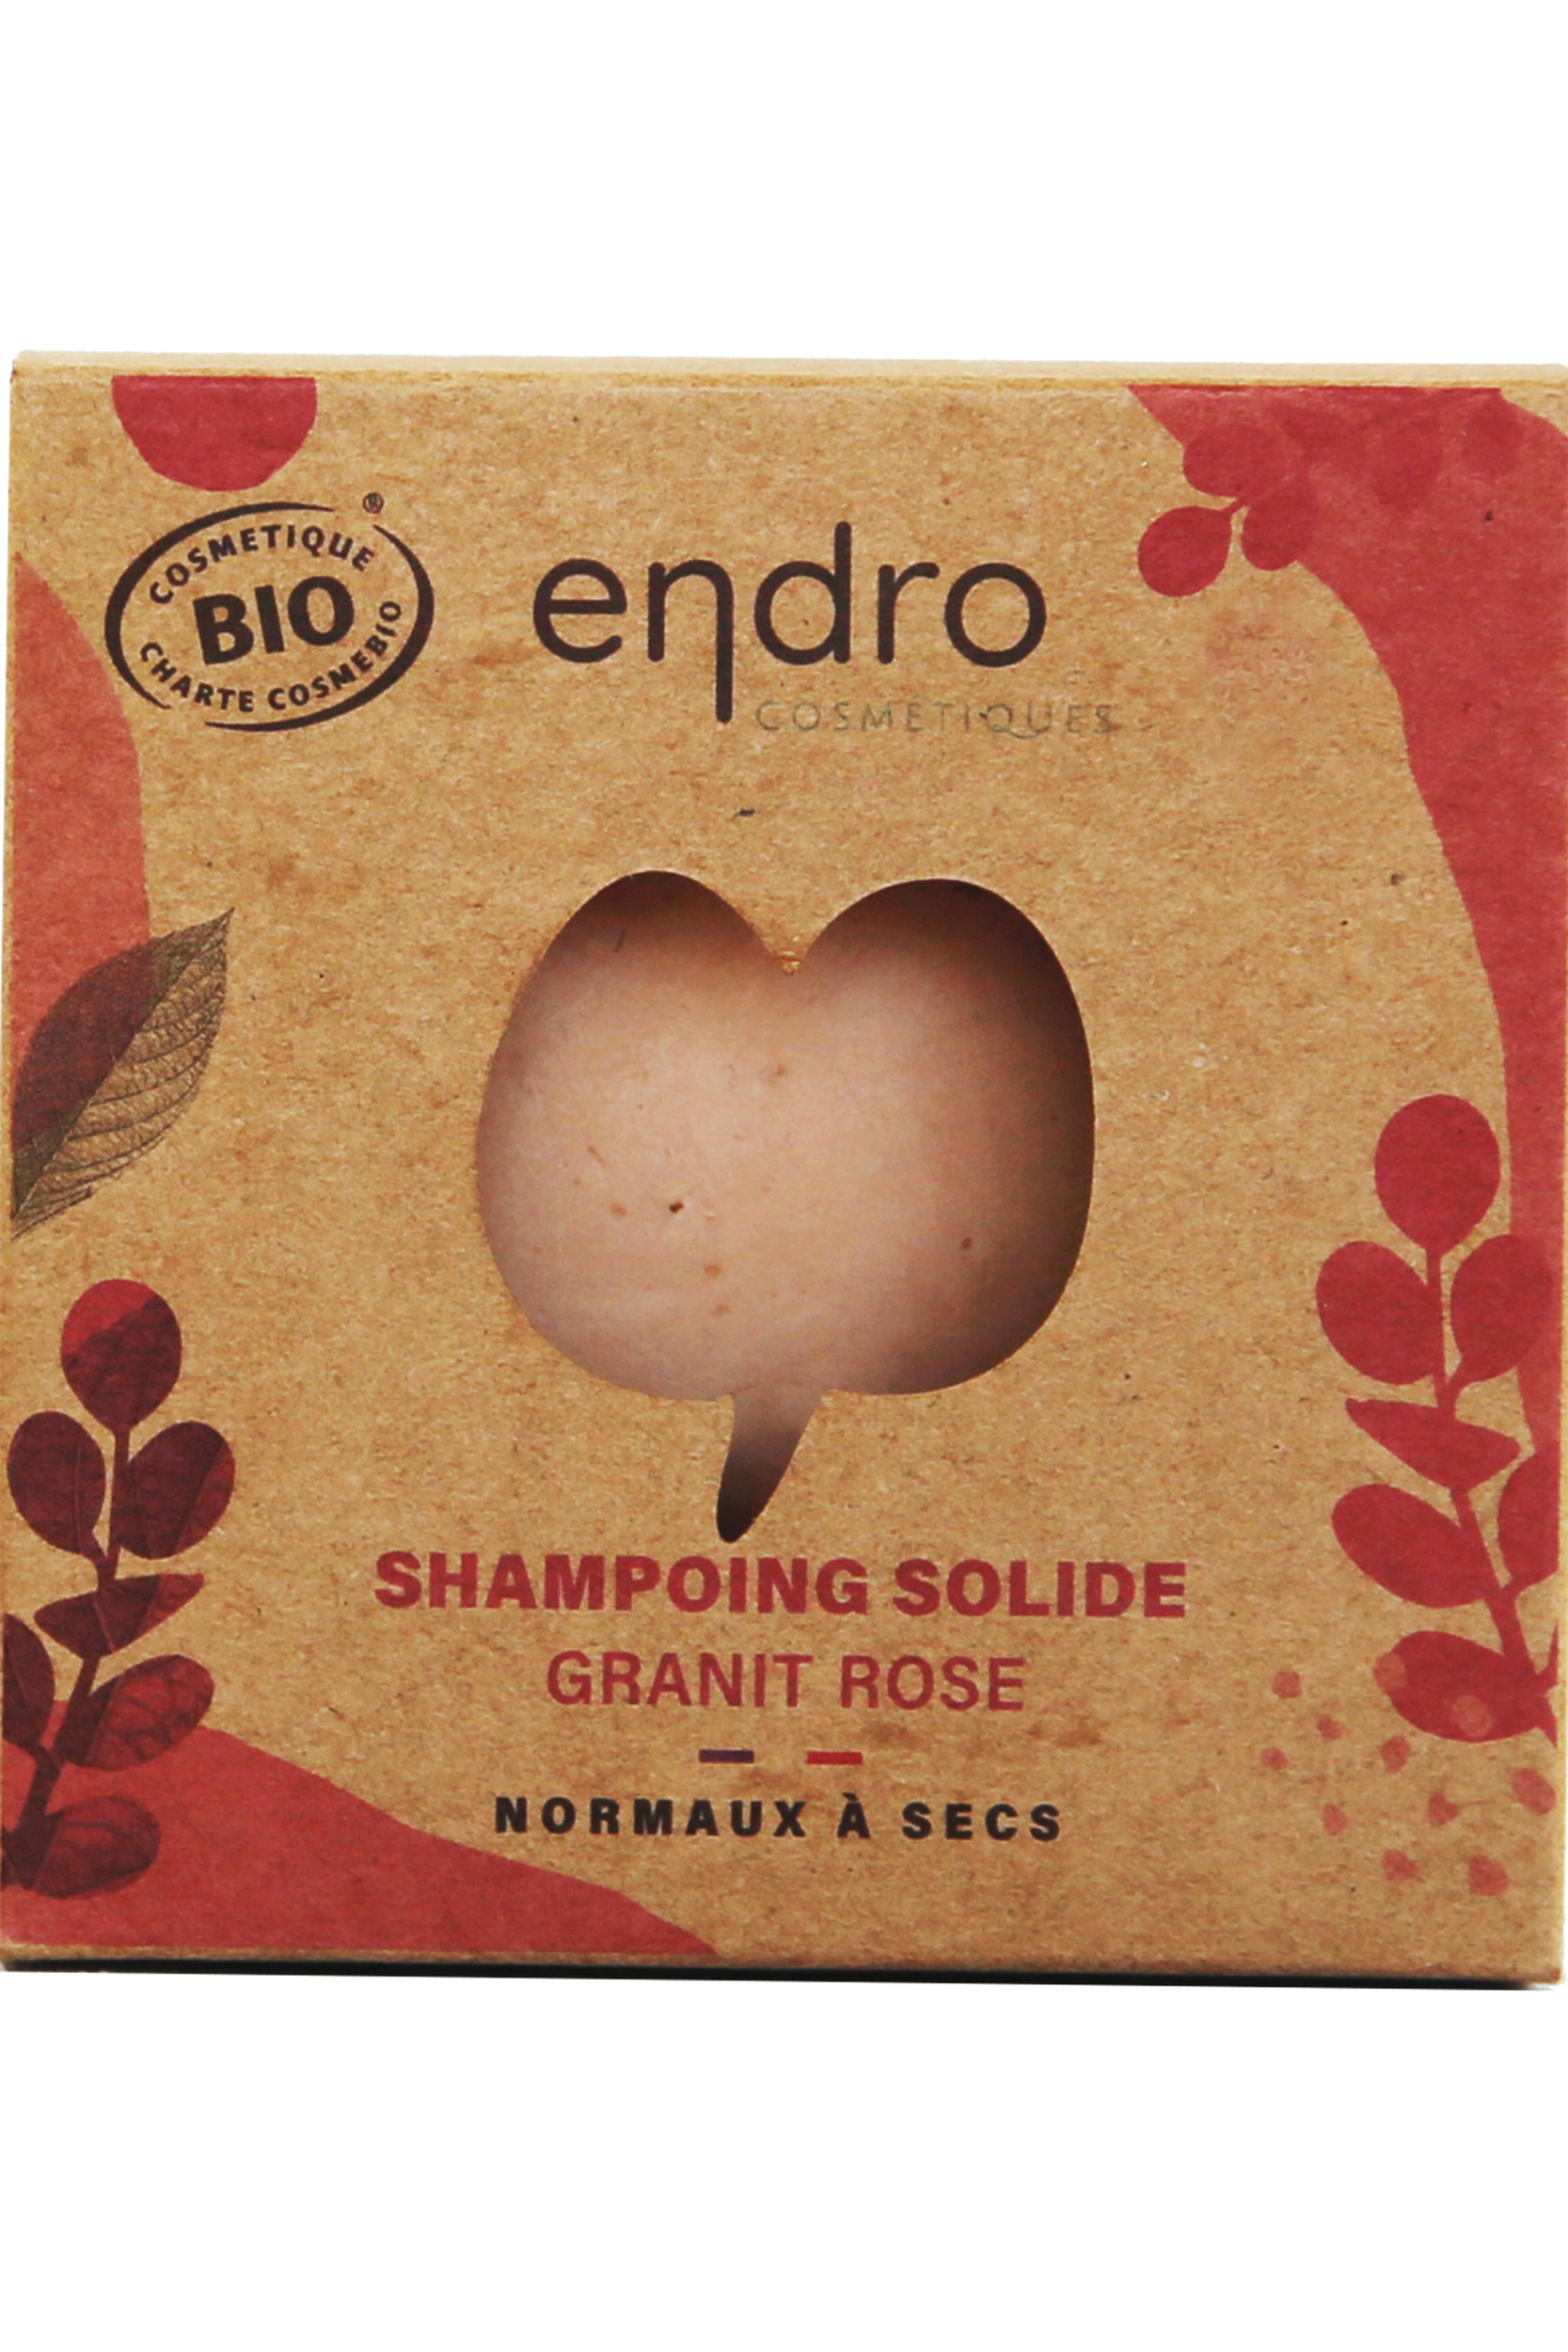 Shampoing solide Granit rose - Cheveux secs